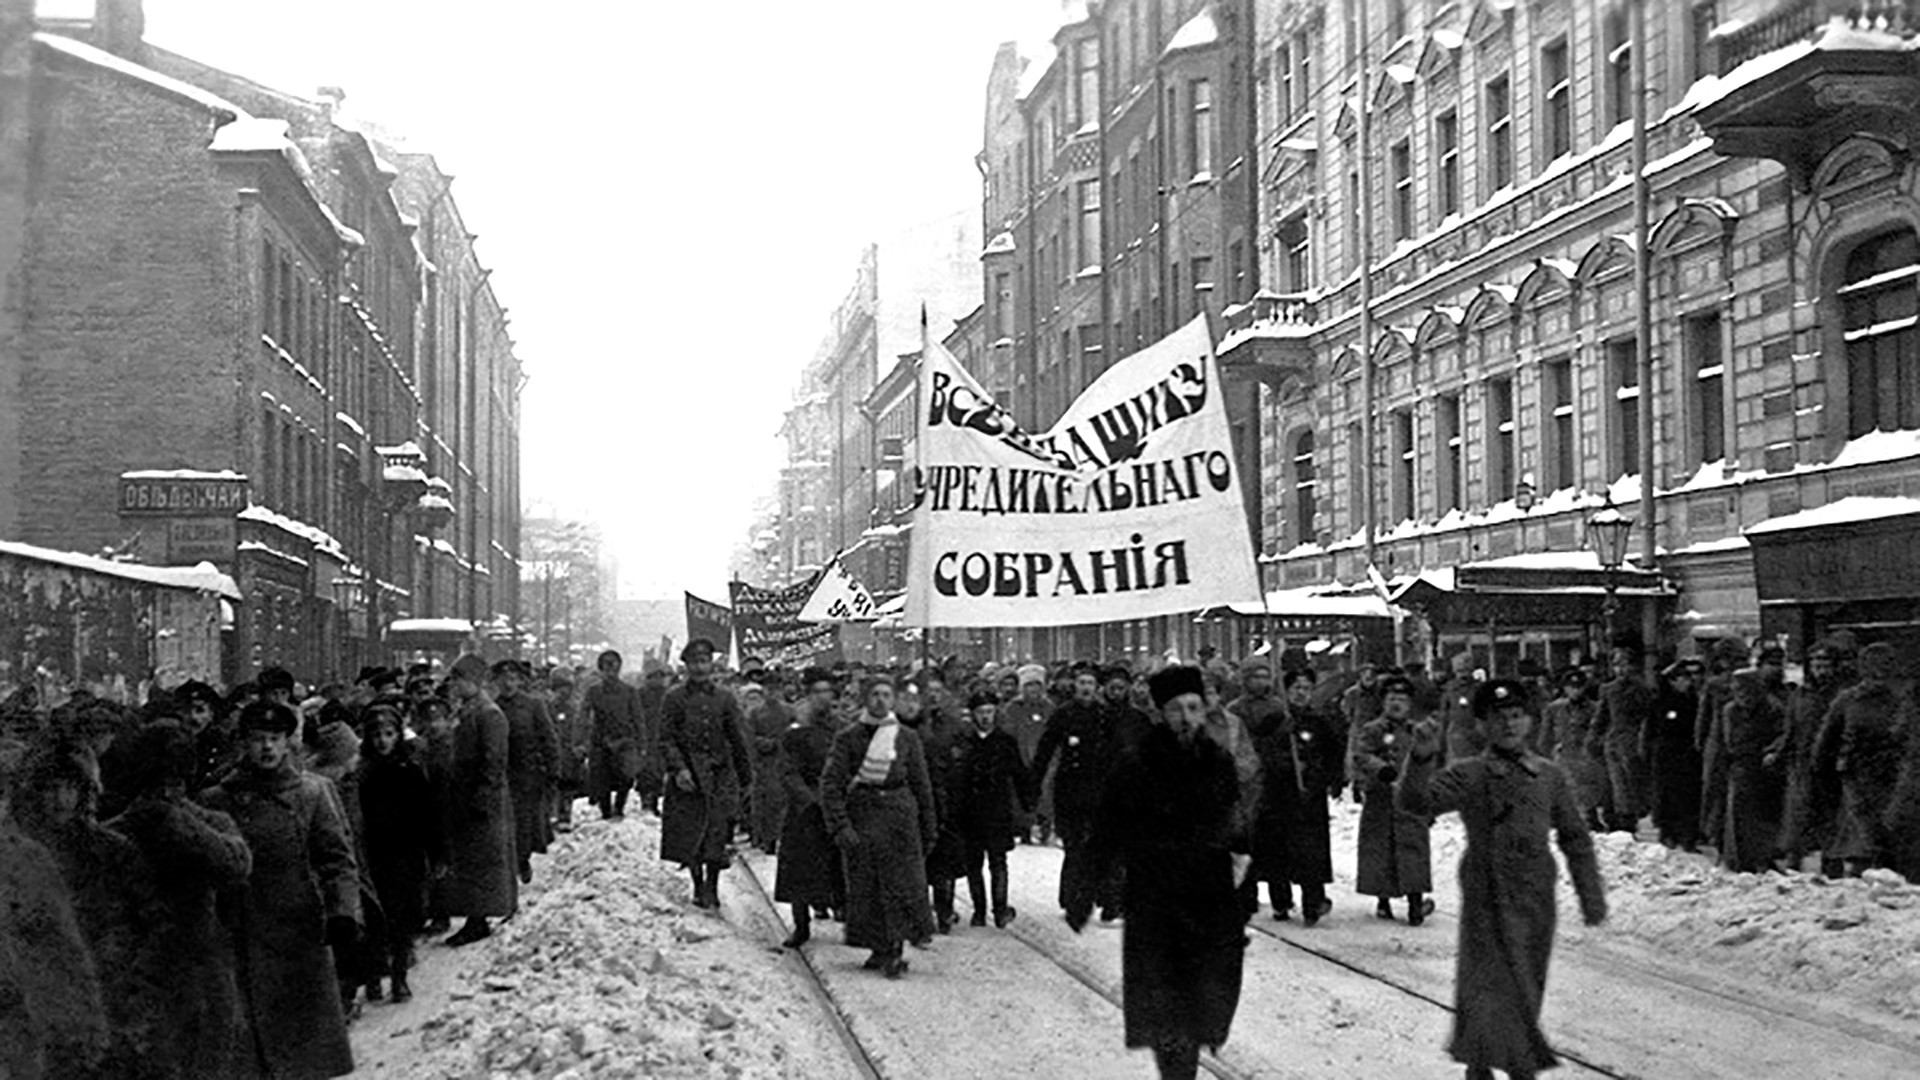 Bolsheviks dispersed a rally that came to the support of the Constituent Assembly, shooting many of the demonstrators